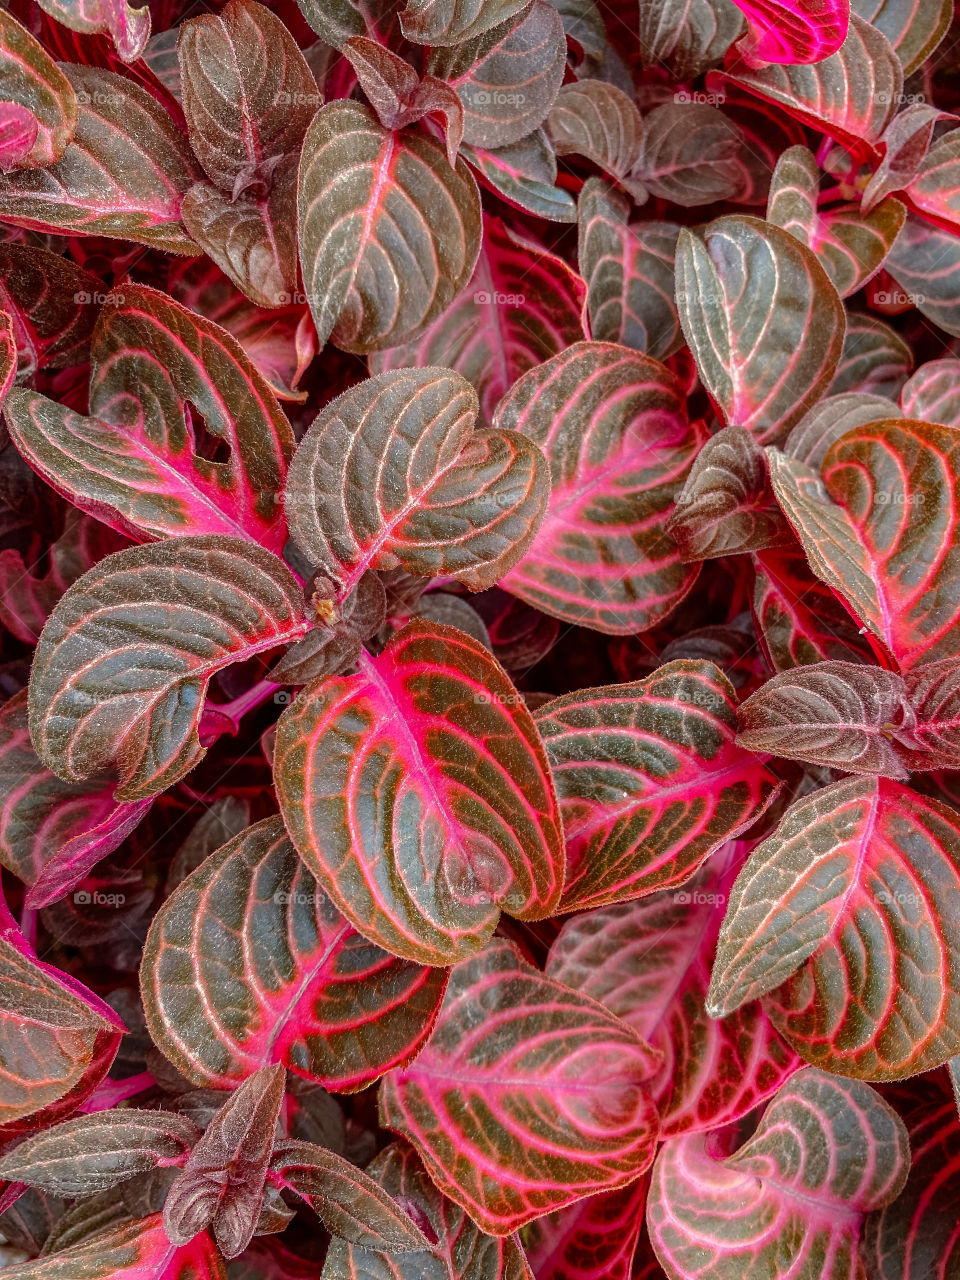 Plant with red / burgundy leaves